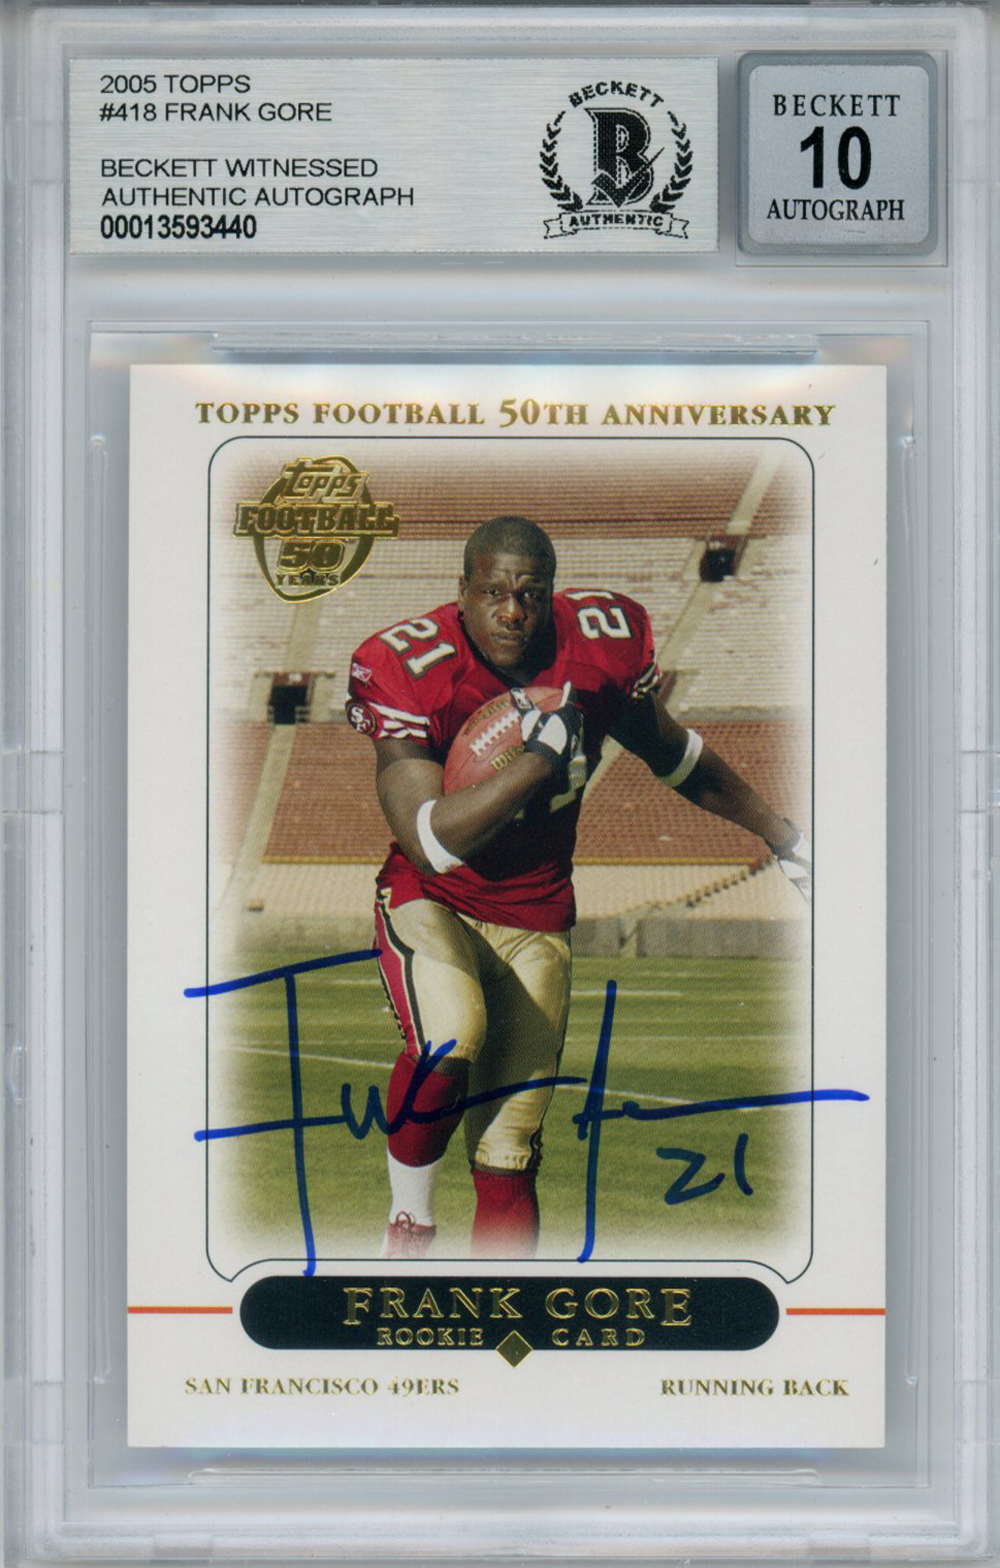 Frank Gore Autographed 2005 Topps #418 Rookie Card Beckett 10 Slab